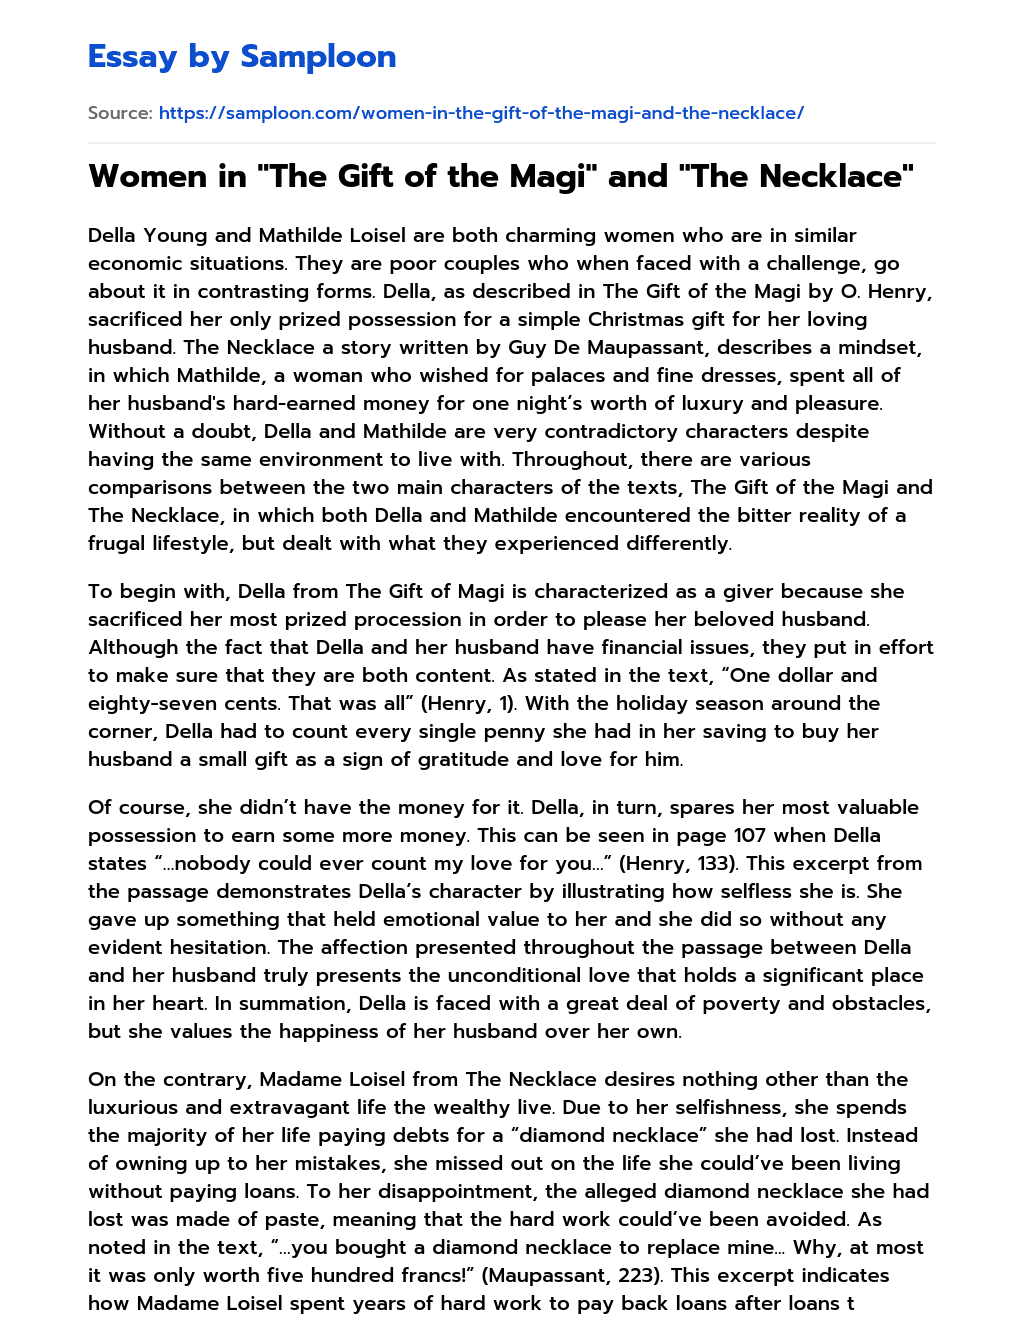 Women in “The Gift of the Magi” and “The Necklace” essay